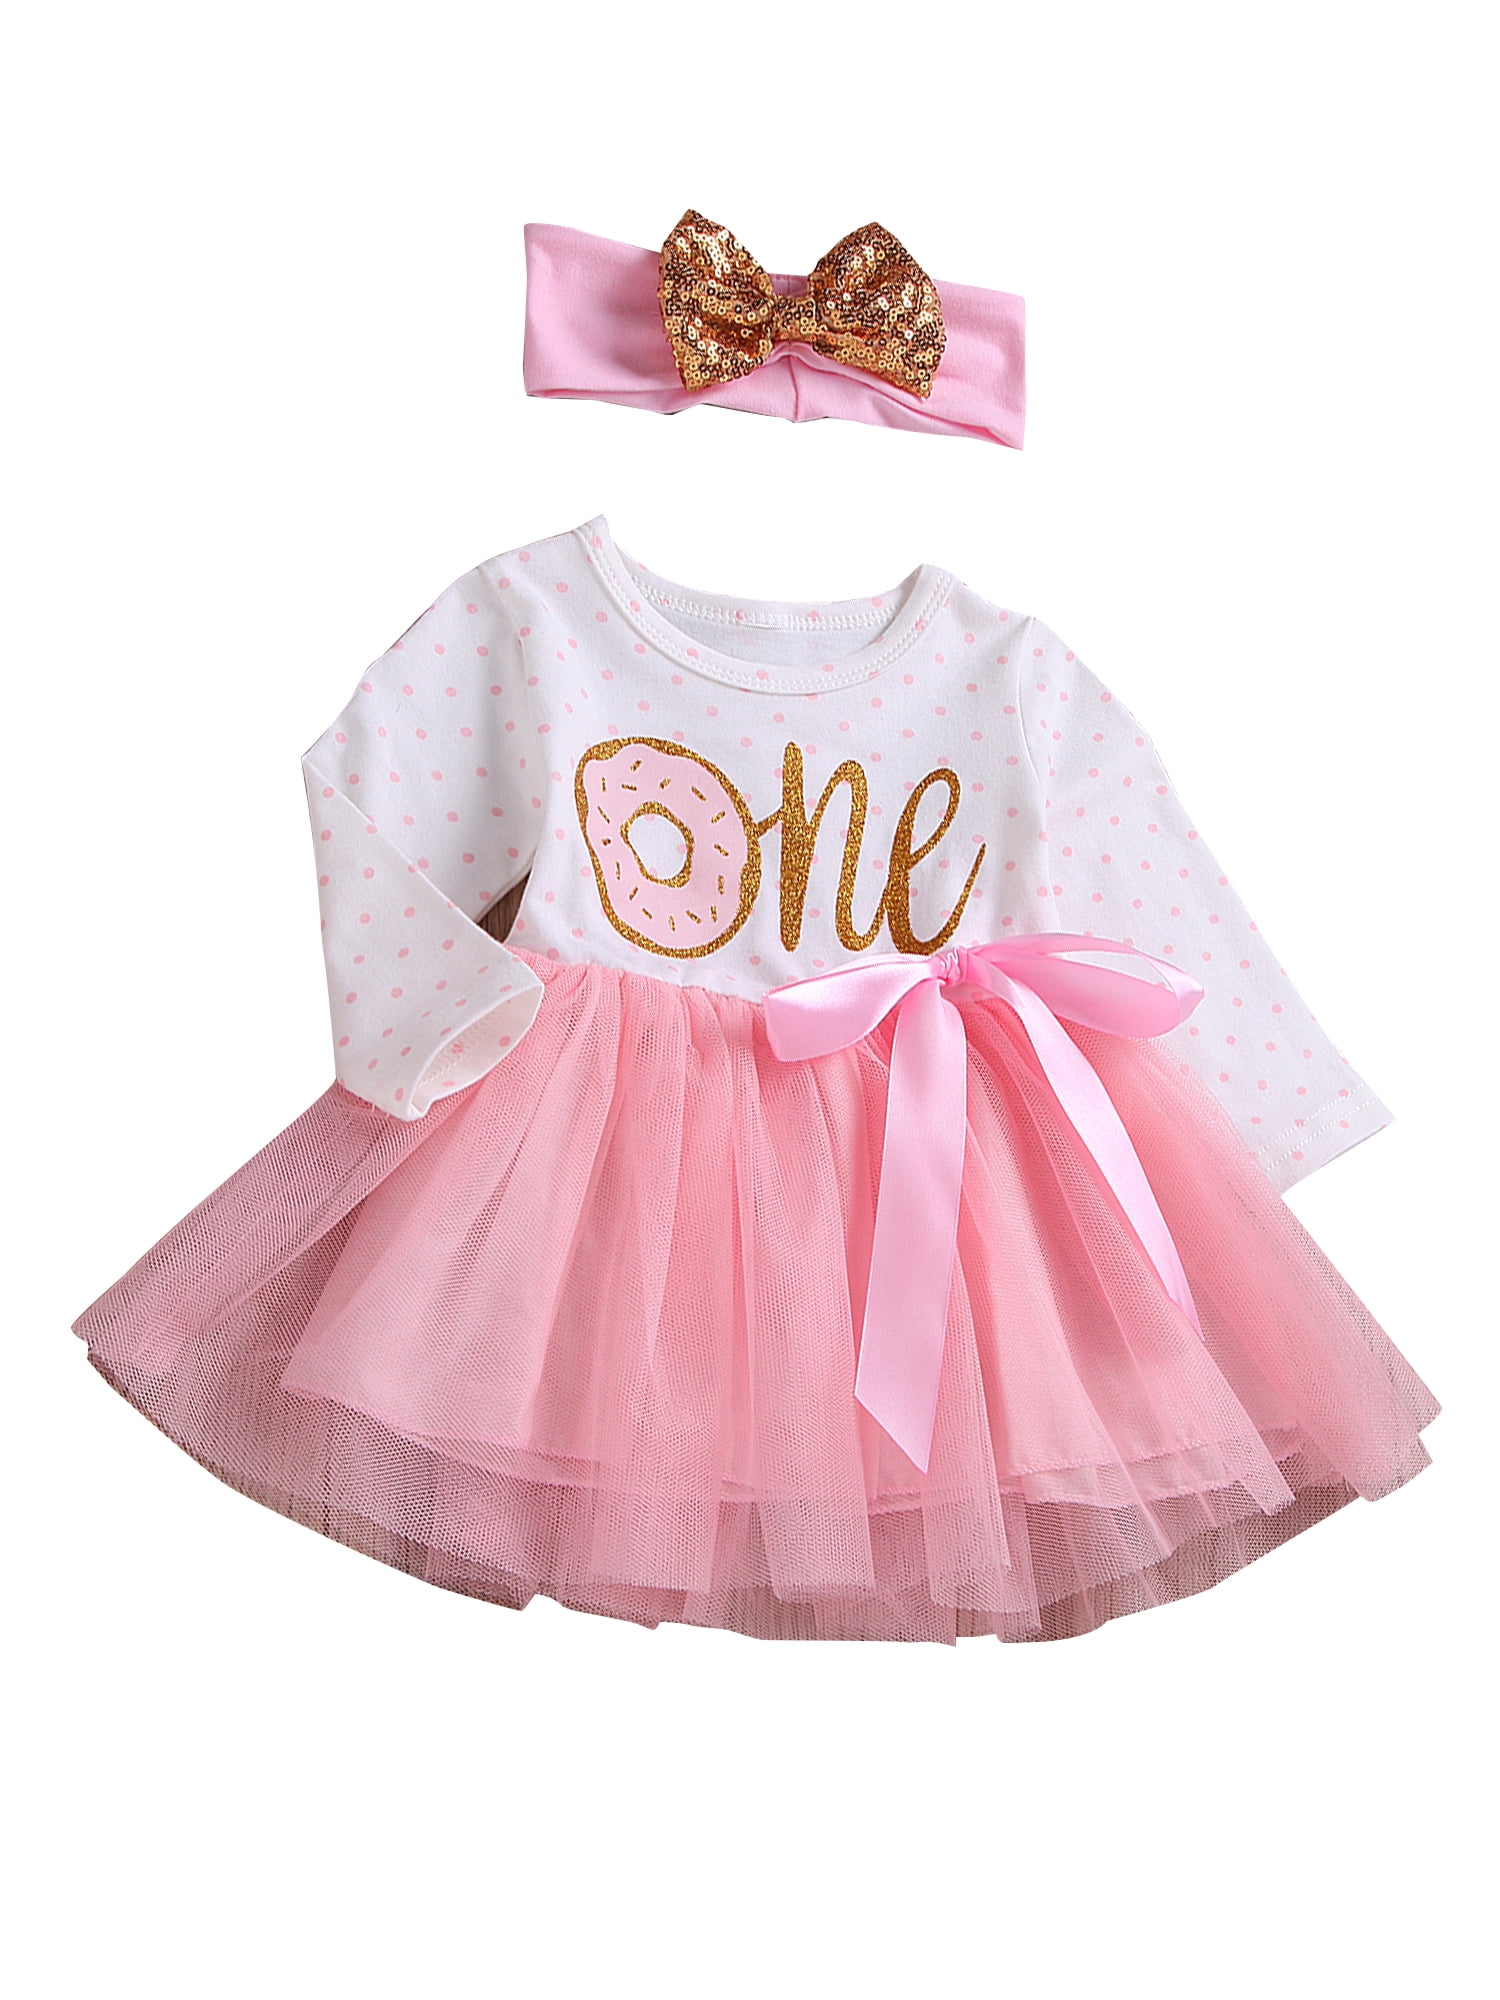 2PCS Infant Baby Girl Sleeveless Lace Tulle Floral Tutu Dress Outfit Set Clothes 